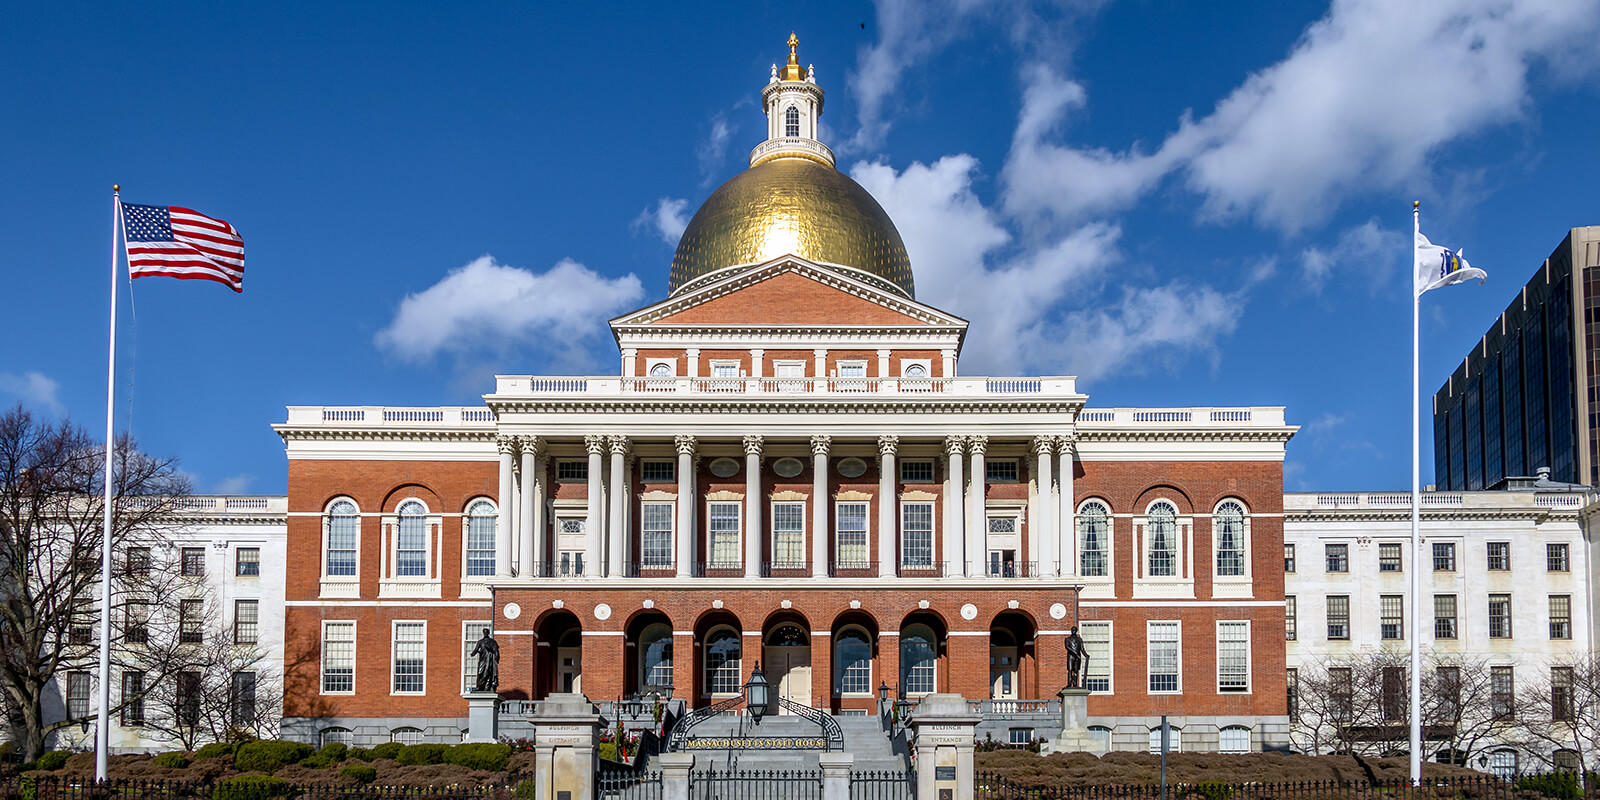 COVID-19 bonuses secured for thousands of commonwealth workers in Massachusetts